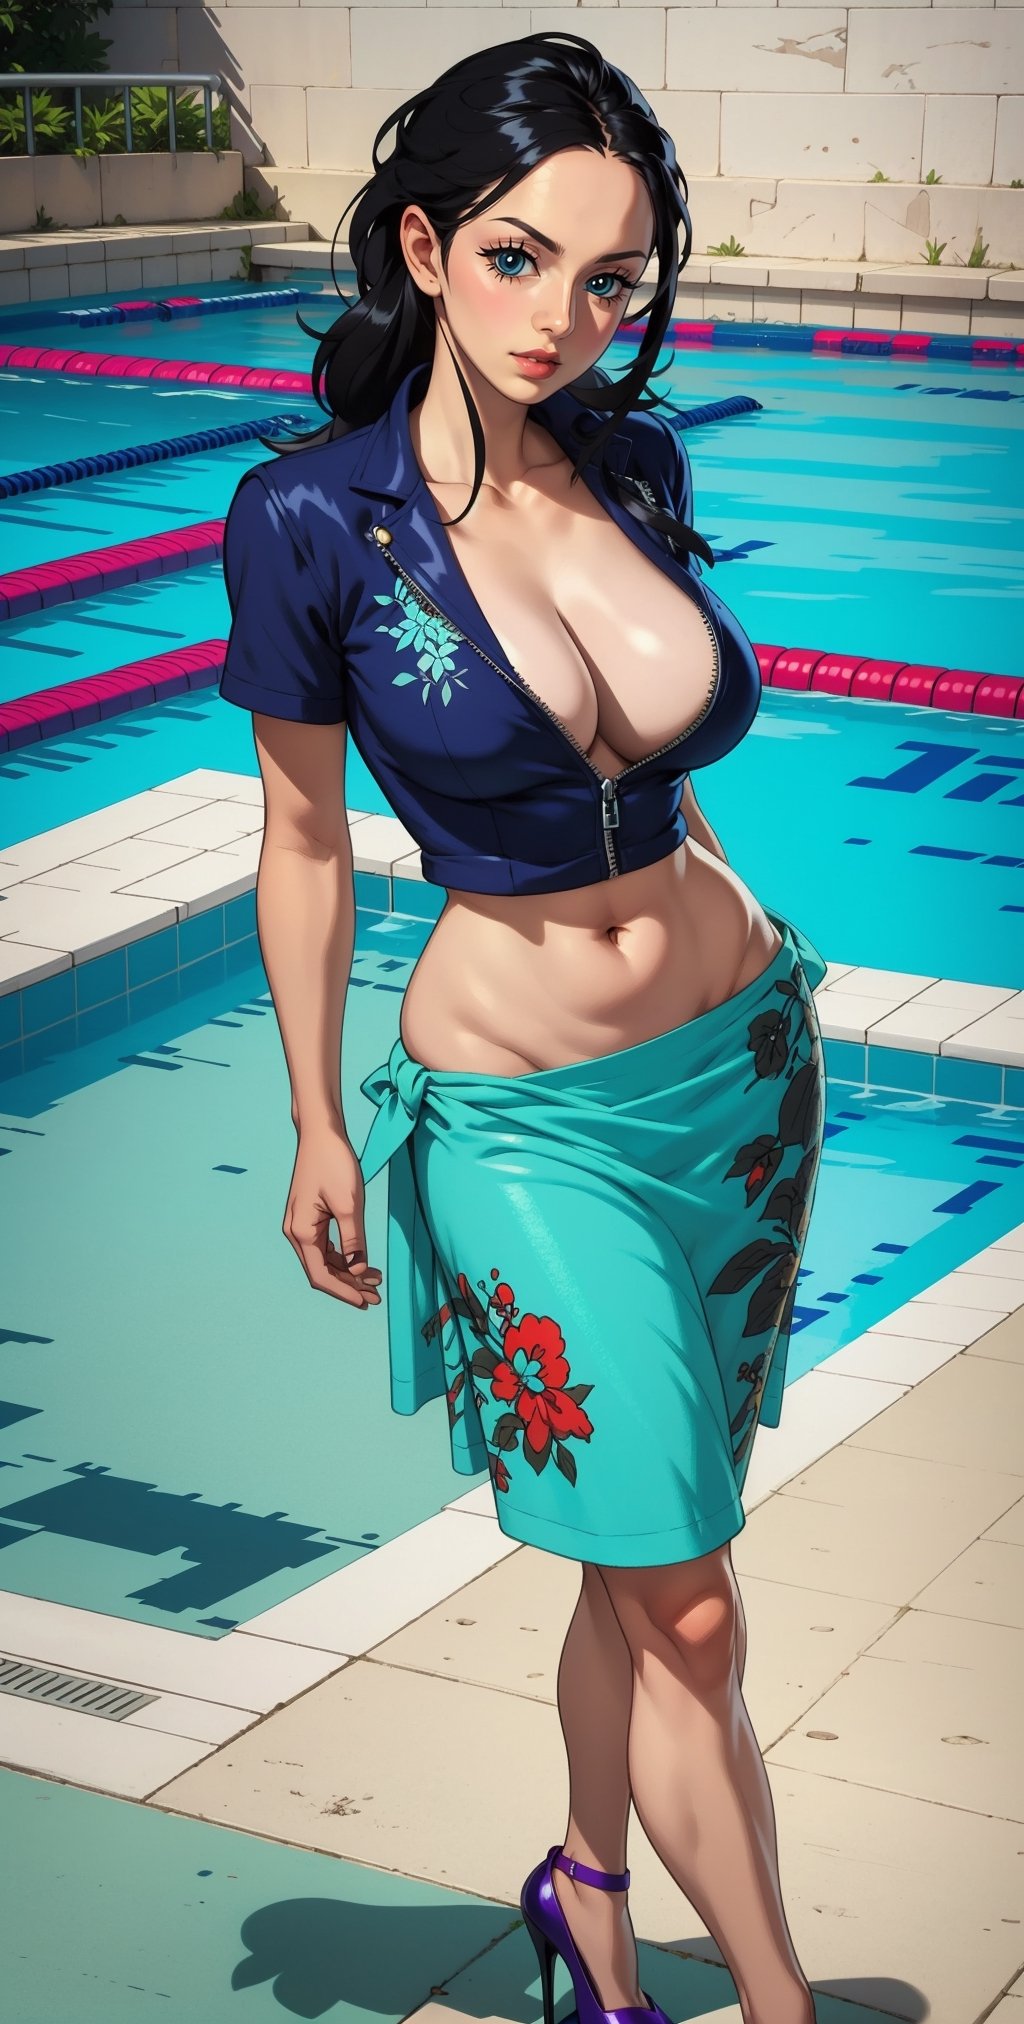 (head fully in frame:1.3), (beautiful face:1.5), (cowboy shot:1.3), looking at viewer, beautiful eyes, (curvy:1.3), (large breasts:1.3), (wide hips:1.2), narrow waist, (abs), (arms behind back:1.4),  rizdraws, thick lineart, (film grain:1.2), (semi-traditional artstyle:1.3),, , , robinop, NicoRobin, (blue eyes:1.4), long hair,  black hair, (open hair:1.4), long skirt, black hair, navel, cleavage, very long hair, collarbone, short sleeves, midriff, high heels, crop top, blue jacket, sunglasses, blue shirt, sunglasses on head, orange long skirt, hair slicked back, partially unzipped, sarong,, (private swimming pool:1.3), summer, daylight, shiny tiles, (light blue tiles:1.4), modern,nico robin,NicoRobin